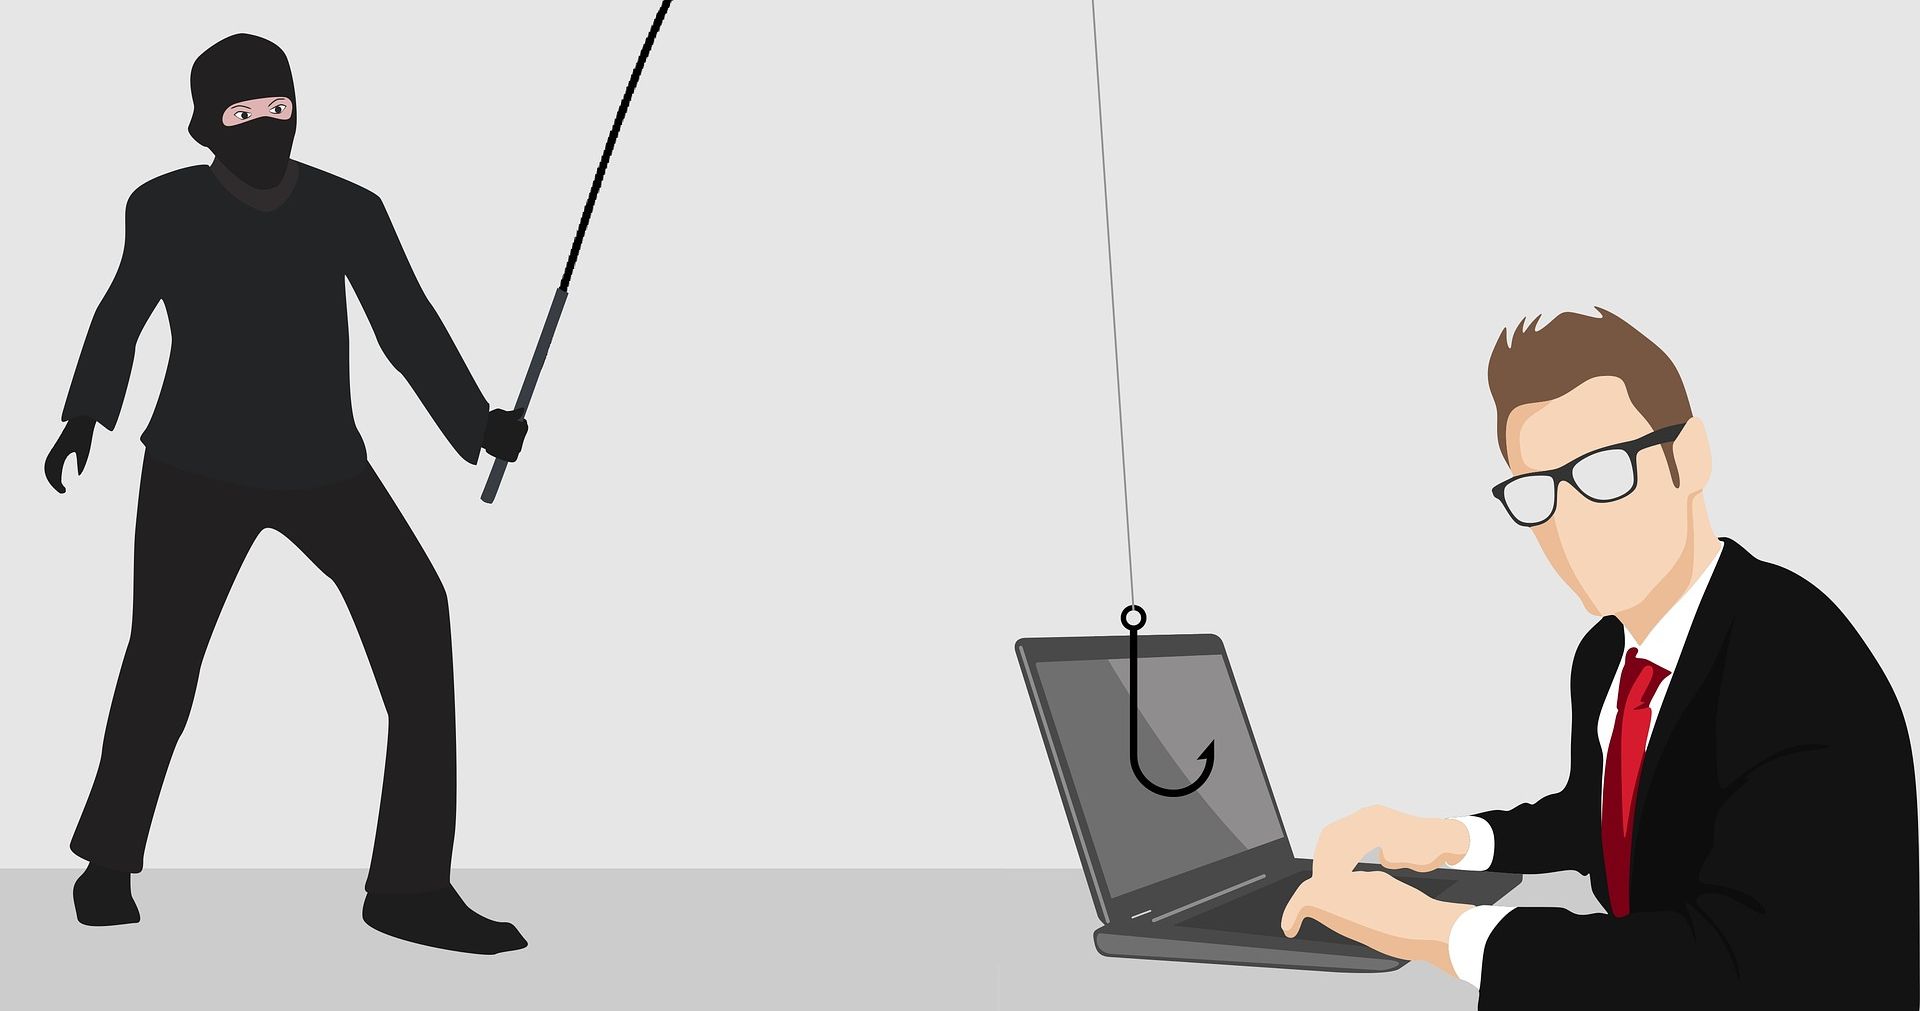 criminal using phishing hook to steal from laptop